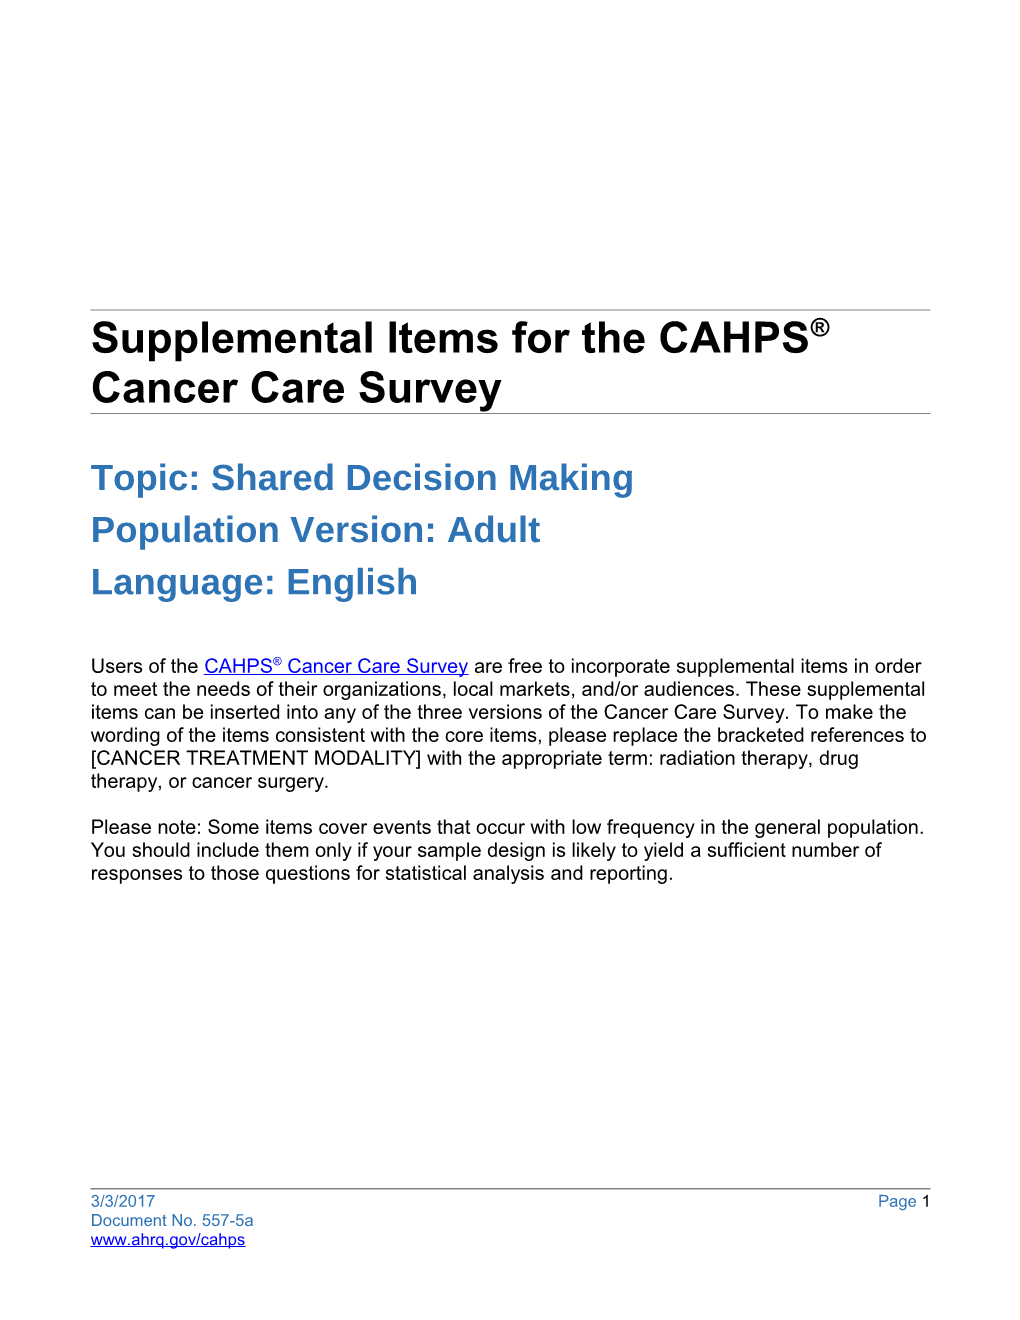 CAHPS Cancer Care Supplemental Items